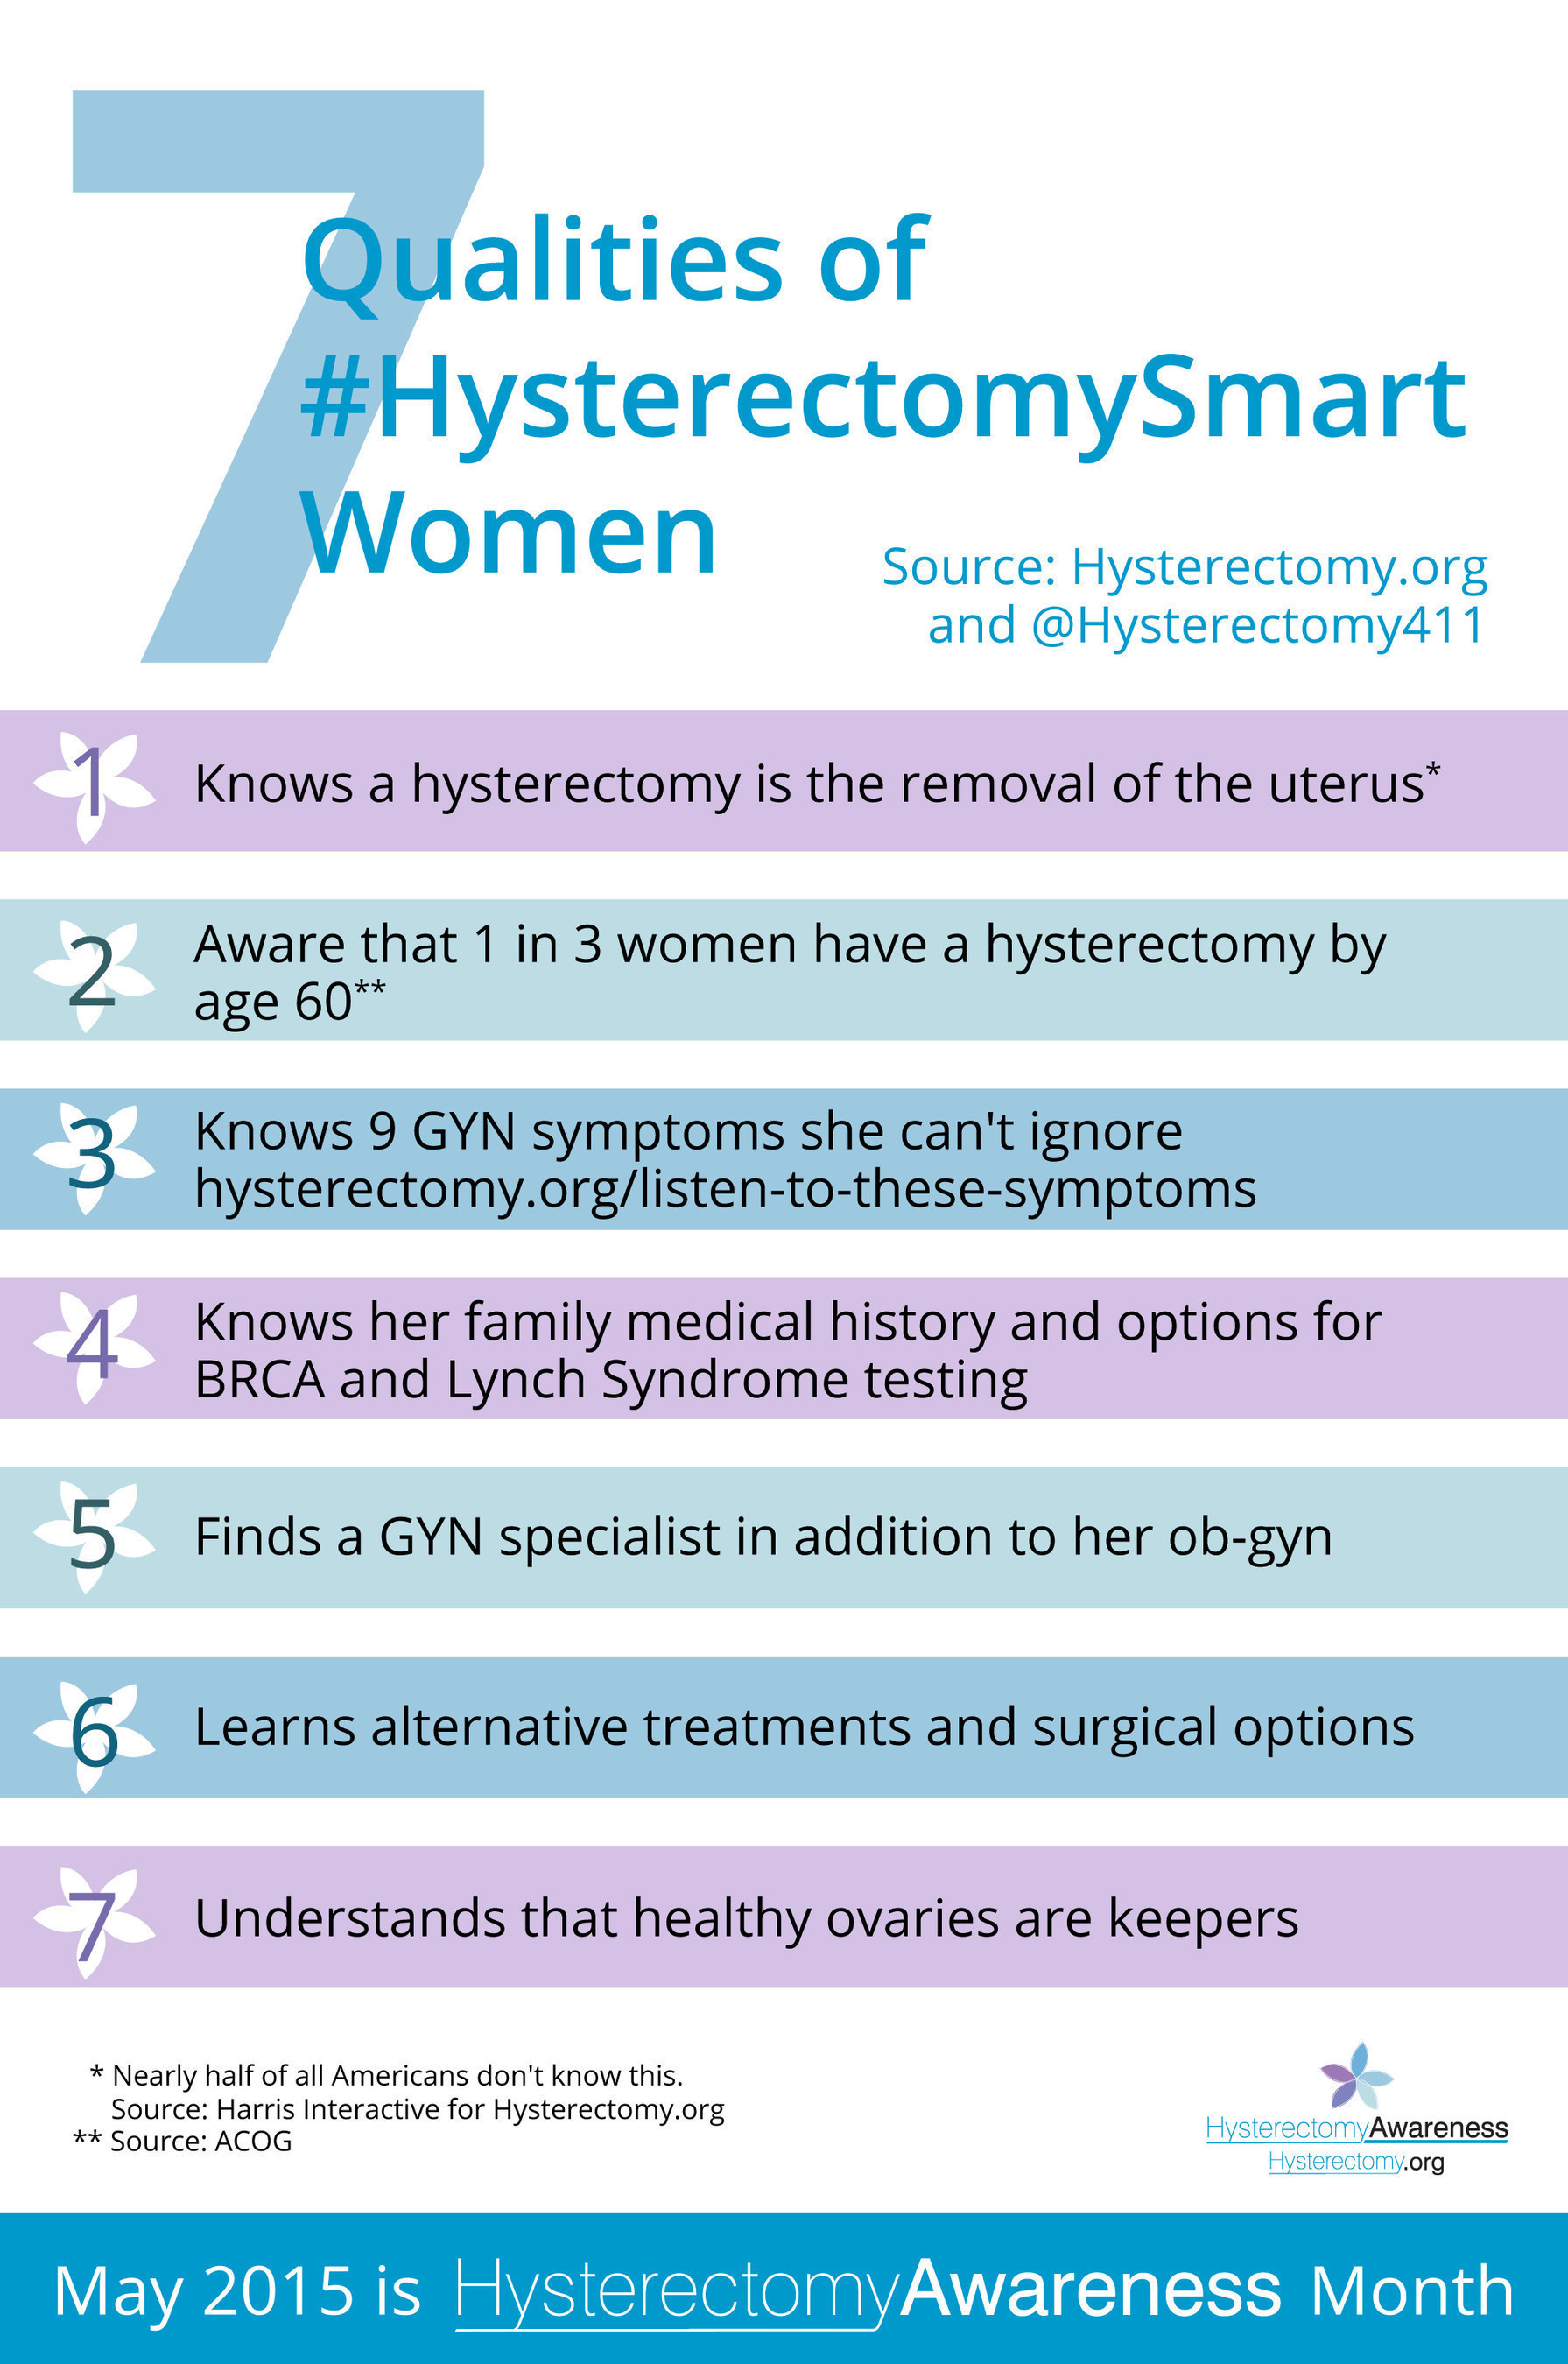 Almost half of American adults are incorrect or don't know what a hysterectomy is, which affects one in 3 women by age 60. (Source: Harris Interactive). May 2015 is Hysterectomy Awareness Month. (Survey was conducted online within the United States by Harris Poll on behalf of Hysterectomy.org from February 11-13, 2015 among 2,026 adults ages 18 and older. This online survey is not based on a probability sample and therefore no estimate of theoretical sampling error can be calculated. For complete survey methodology, including weighting variables, please contact Laura Williams, 512.497.8035.)